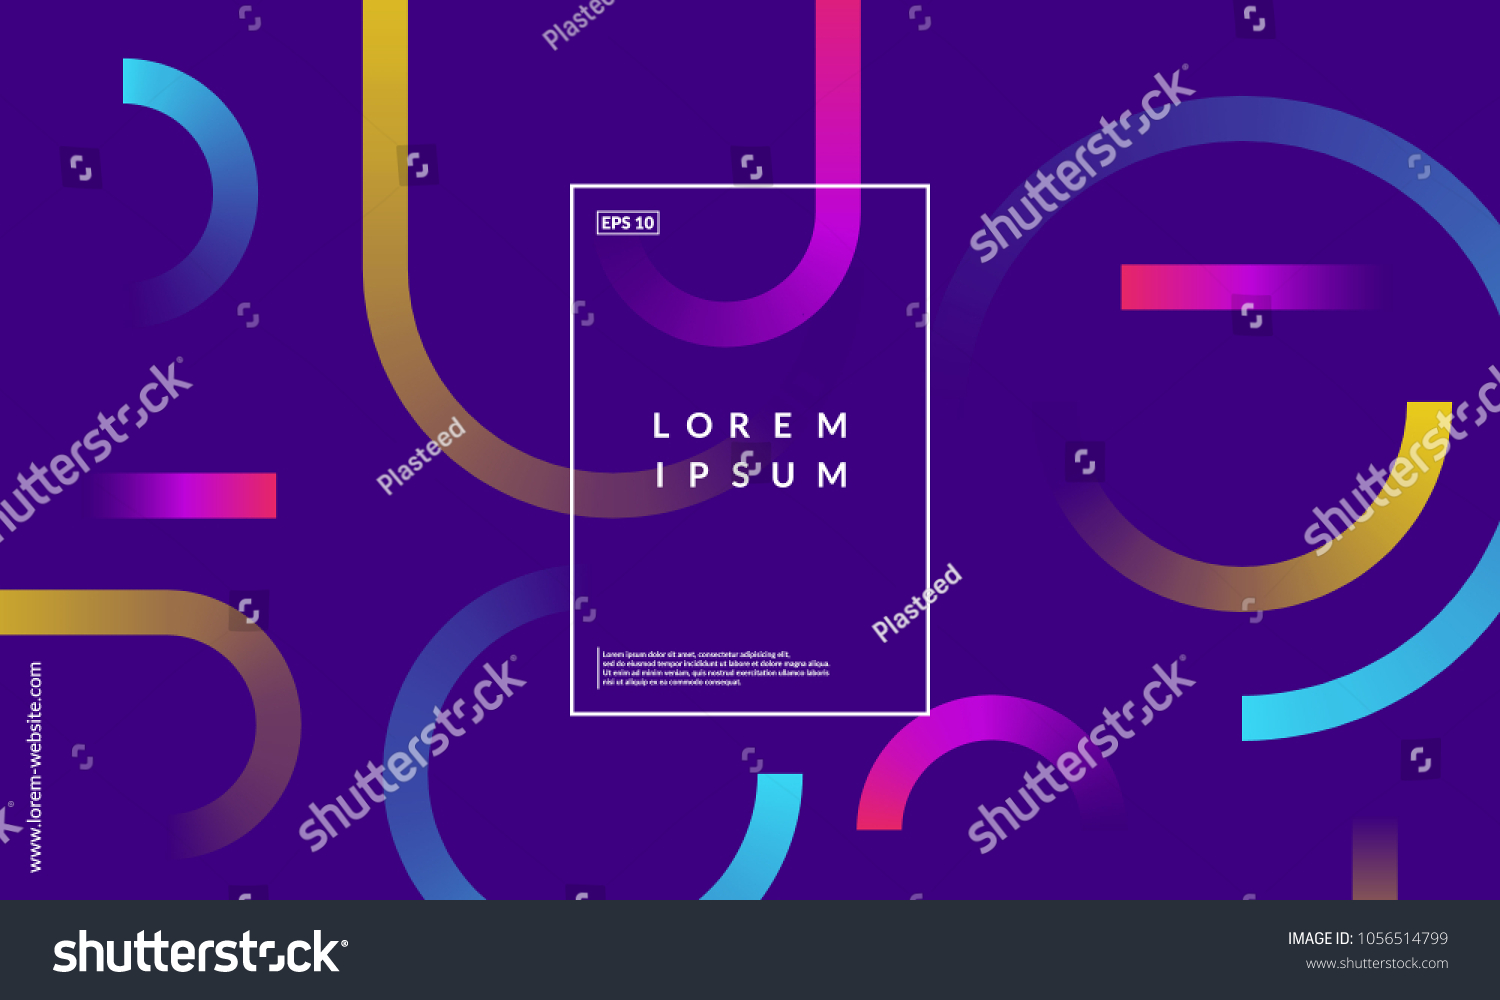 Minimal geometric background. Simple shapes with trendy gradients. Eps10 vector. #1056514799